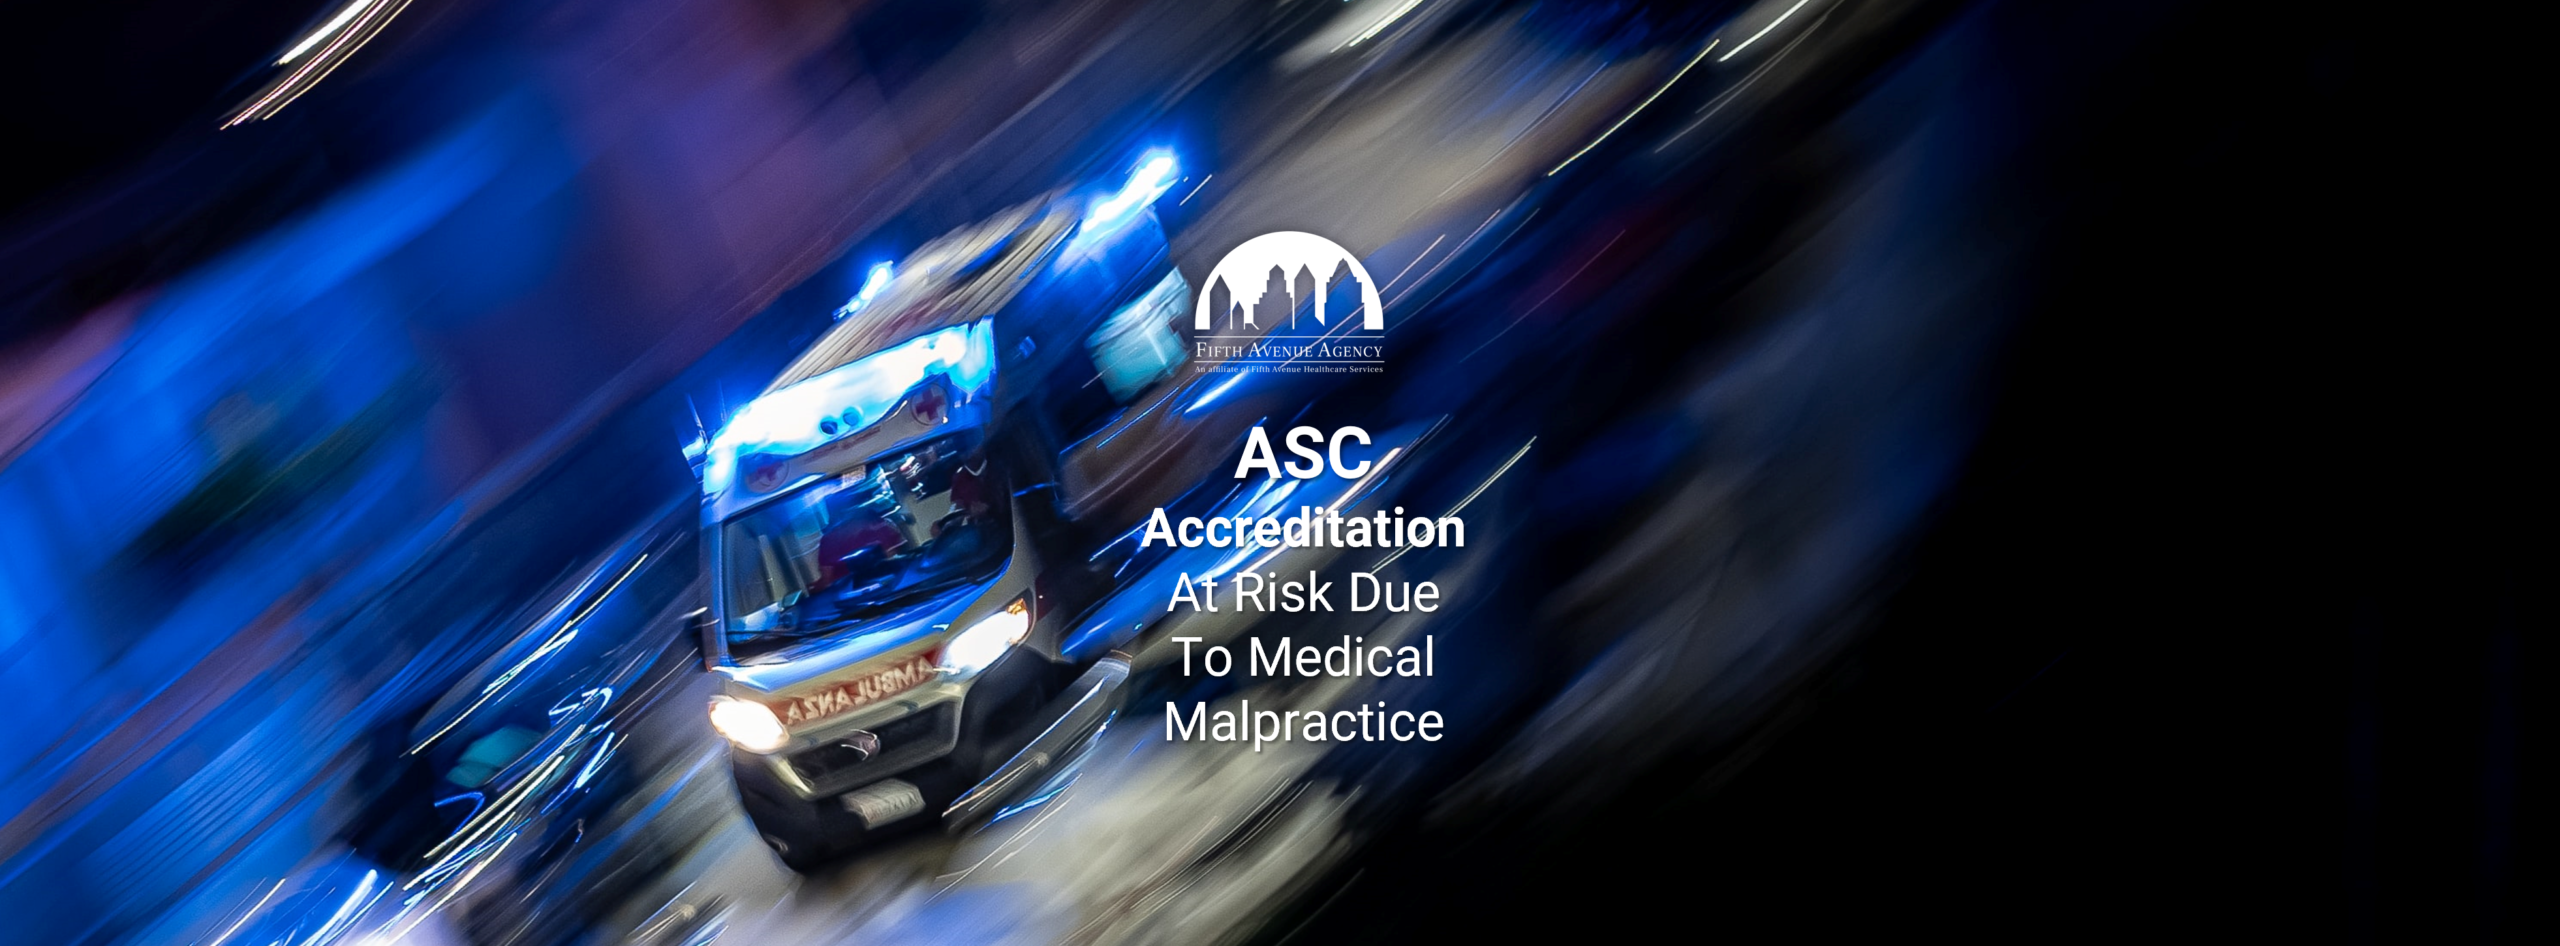 ASC Accreditation At Risk Due To Medical Malpractice